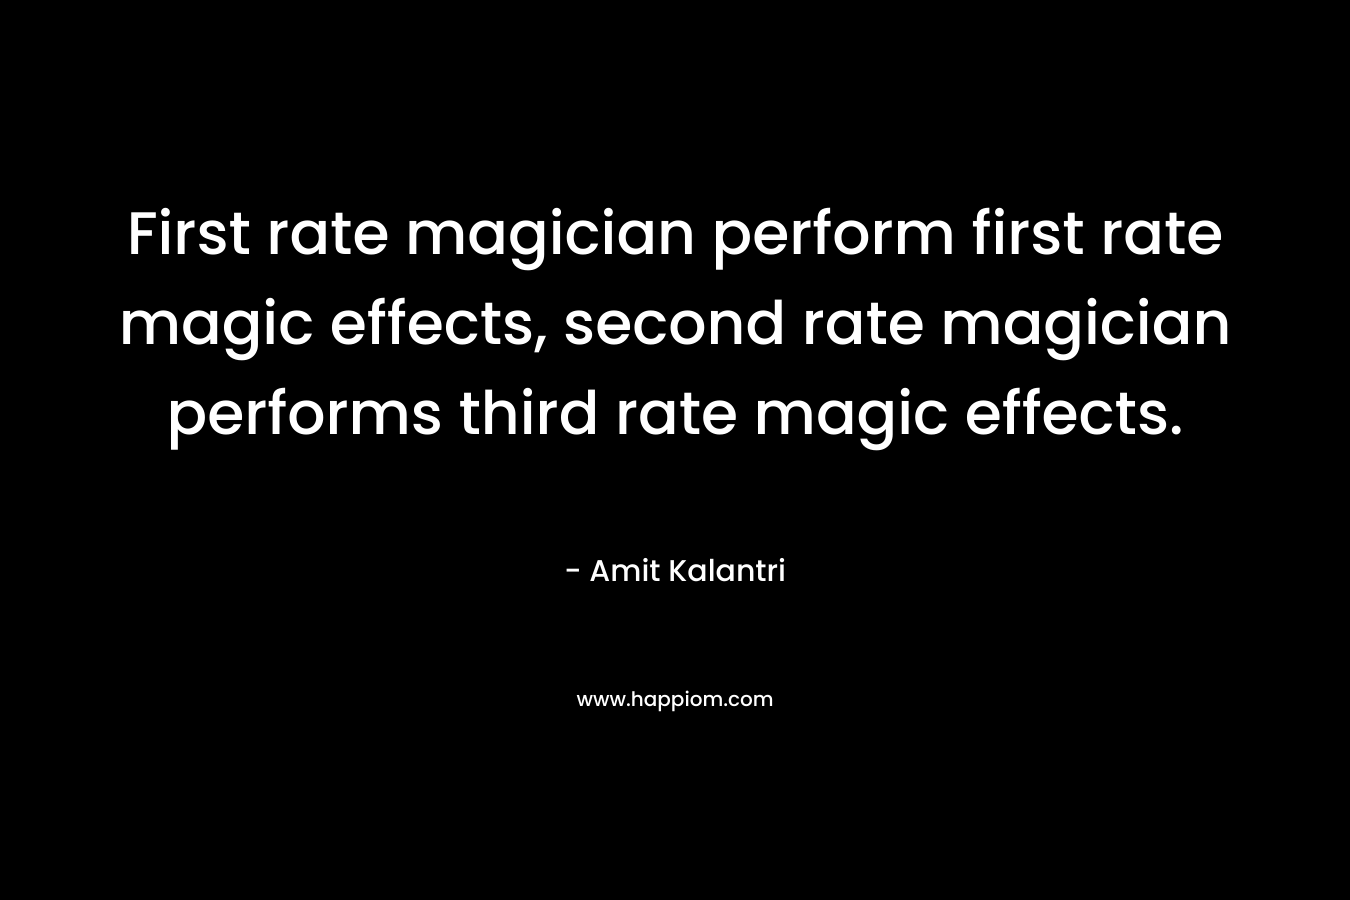 First rate magician perform first rate magic effects, second rate magician performs third rate magic effects.